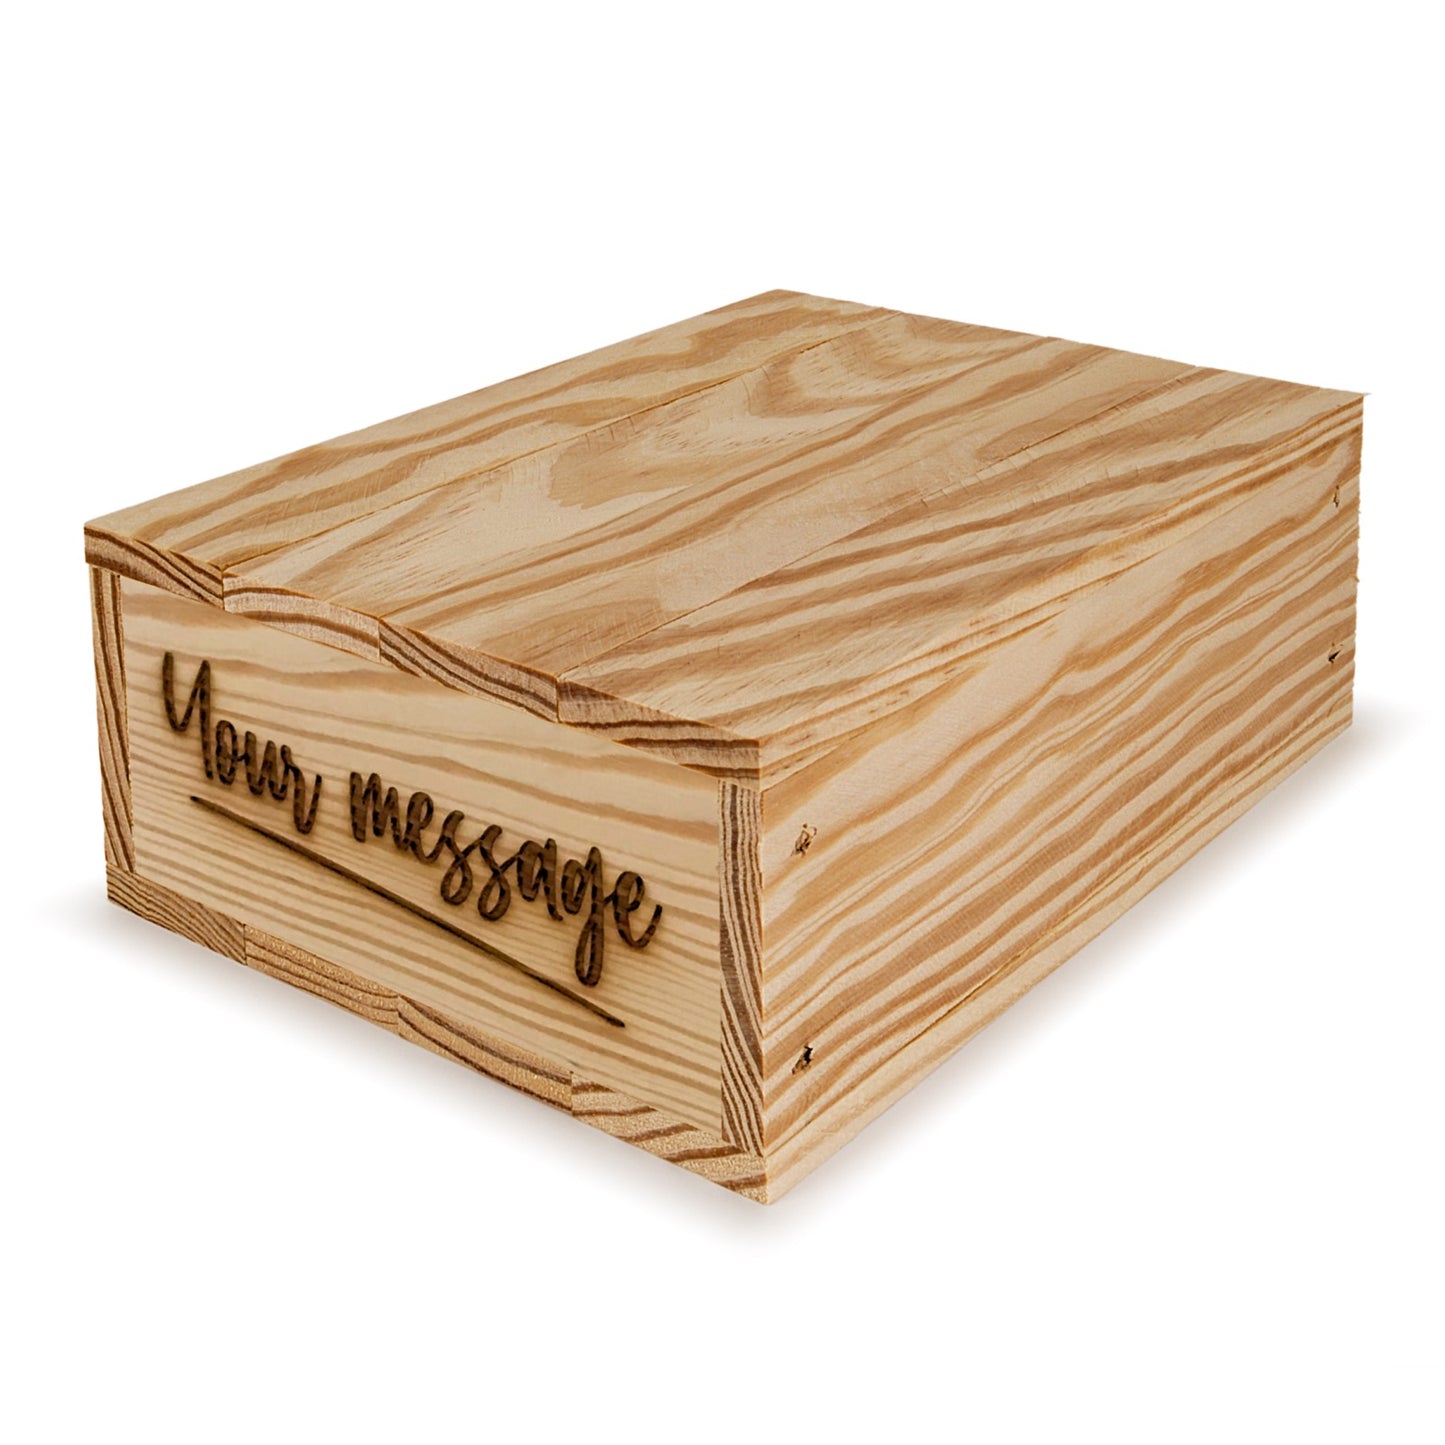 Small wooden crate with lid and custom message 8x6.25x2.75, 6-BX-8-6.25-2.75-ST-NW-LL, 12-BX-8-6.25-2.75-ST-NW-LL, 24-BX-8-6.25-2.75-ST-NW-LL, 48-BX-8-6.25-2.75-ST-NW-LL, 96-BX-8-6.25-2.75-ST-NW-LL